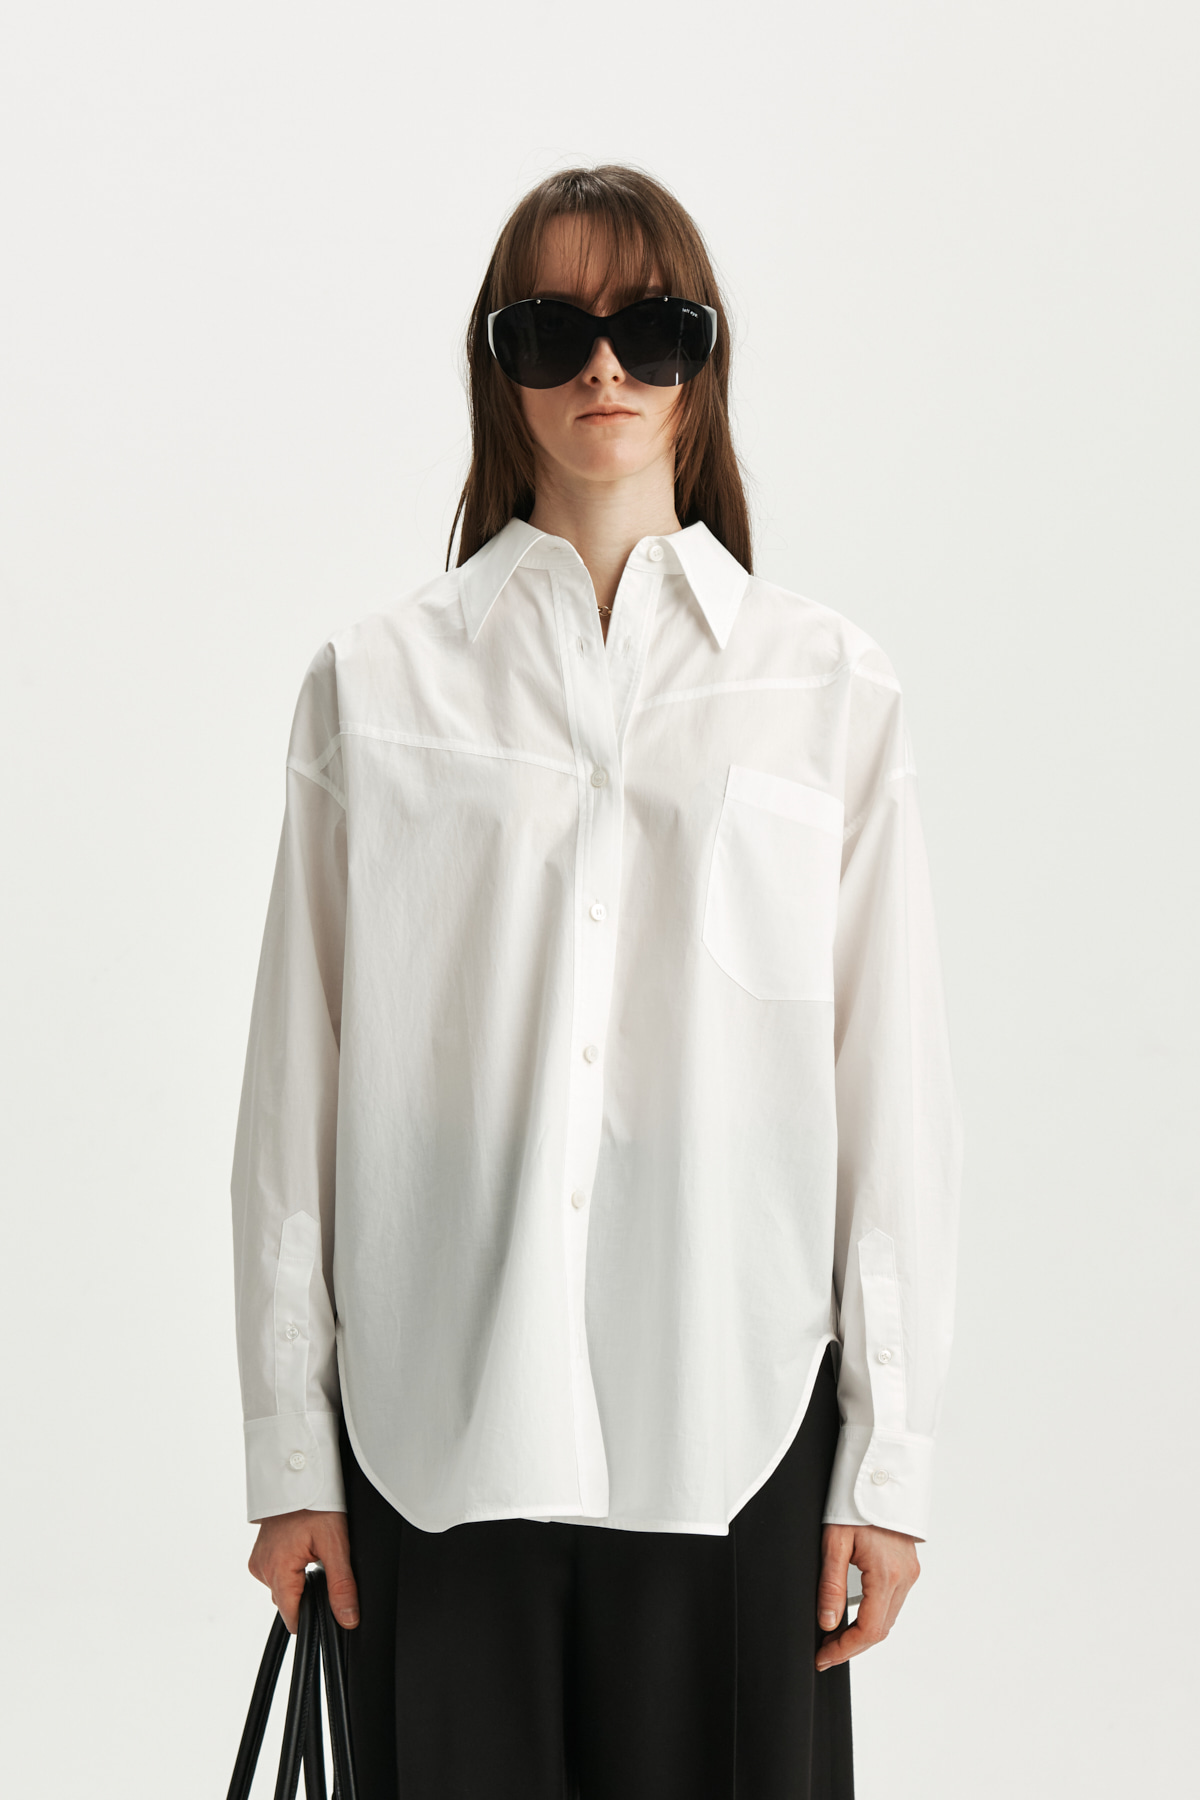 TWO WAY SILHOUETTE SHIRT IN WHITE